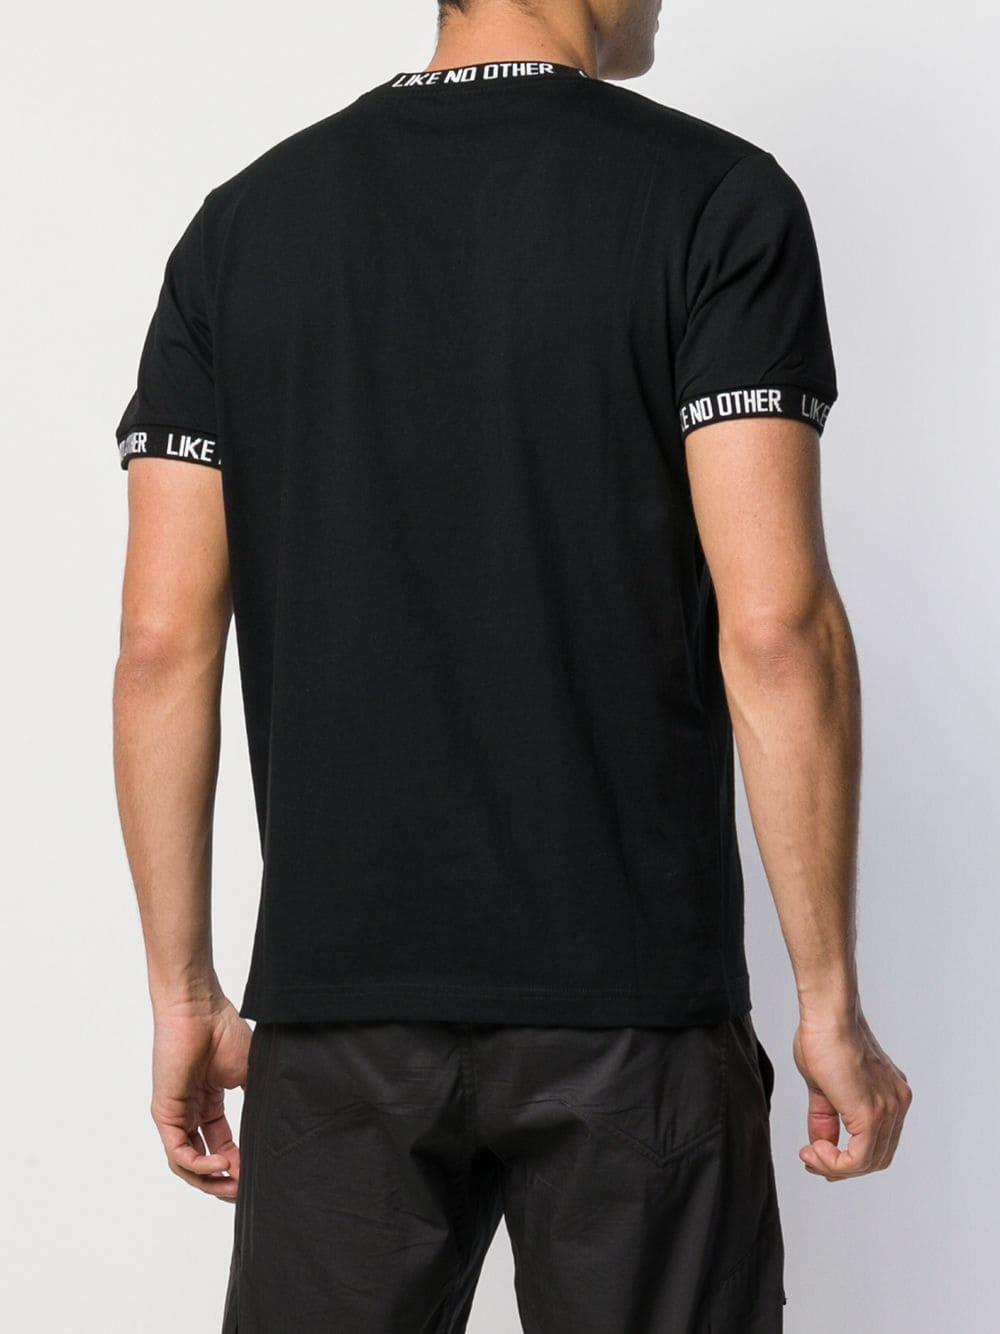 Kappa Cotton Like No Other T-shirt in Black for Men | Lyst